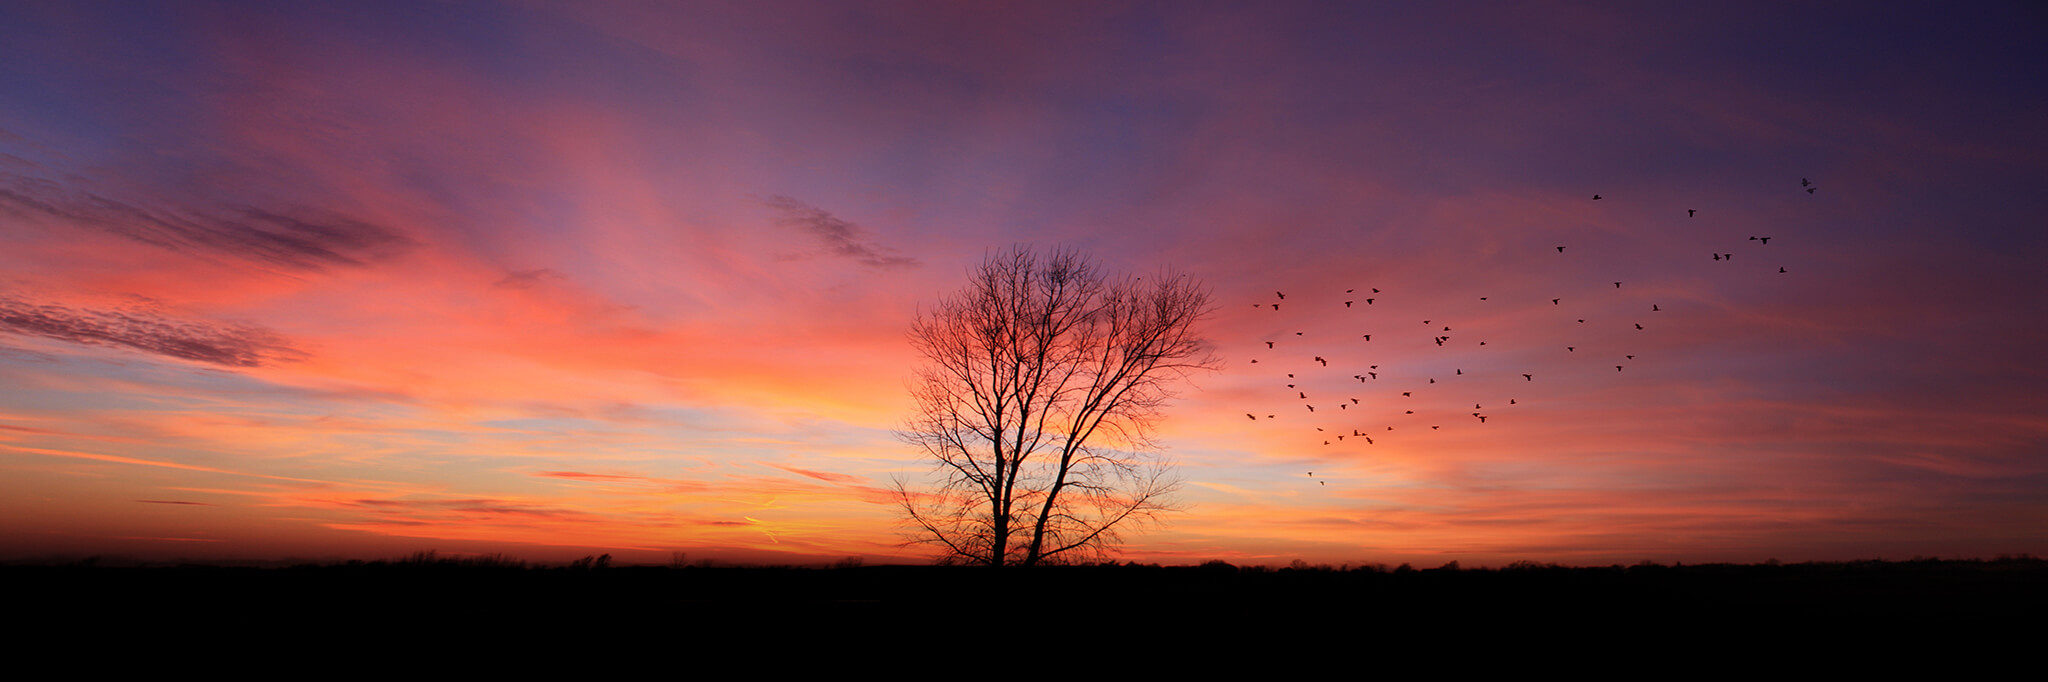 Colorful Sunset and Tree with Birds